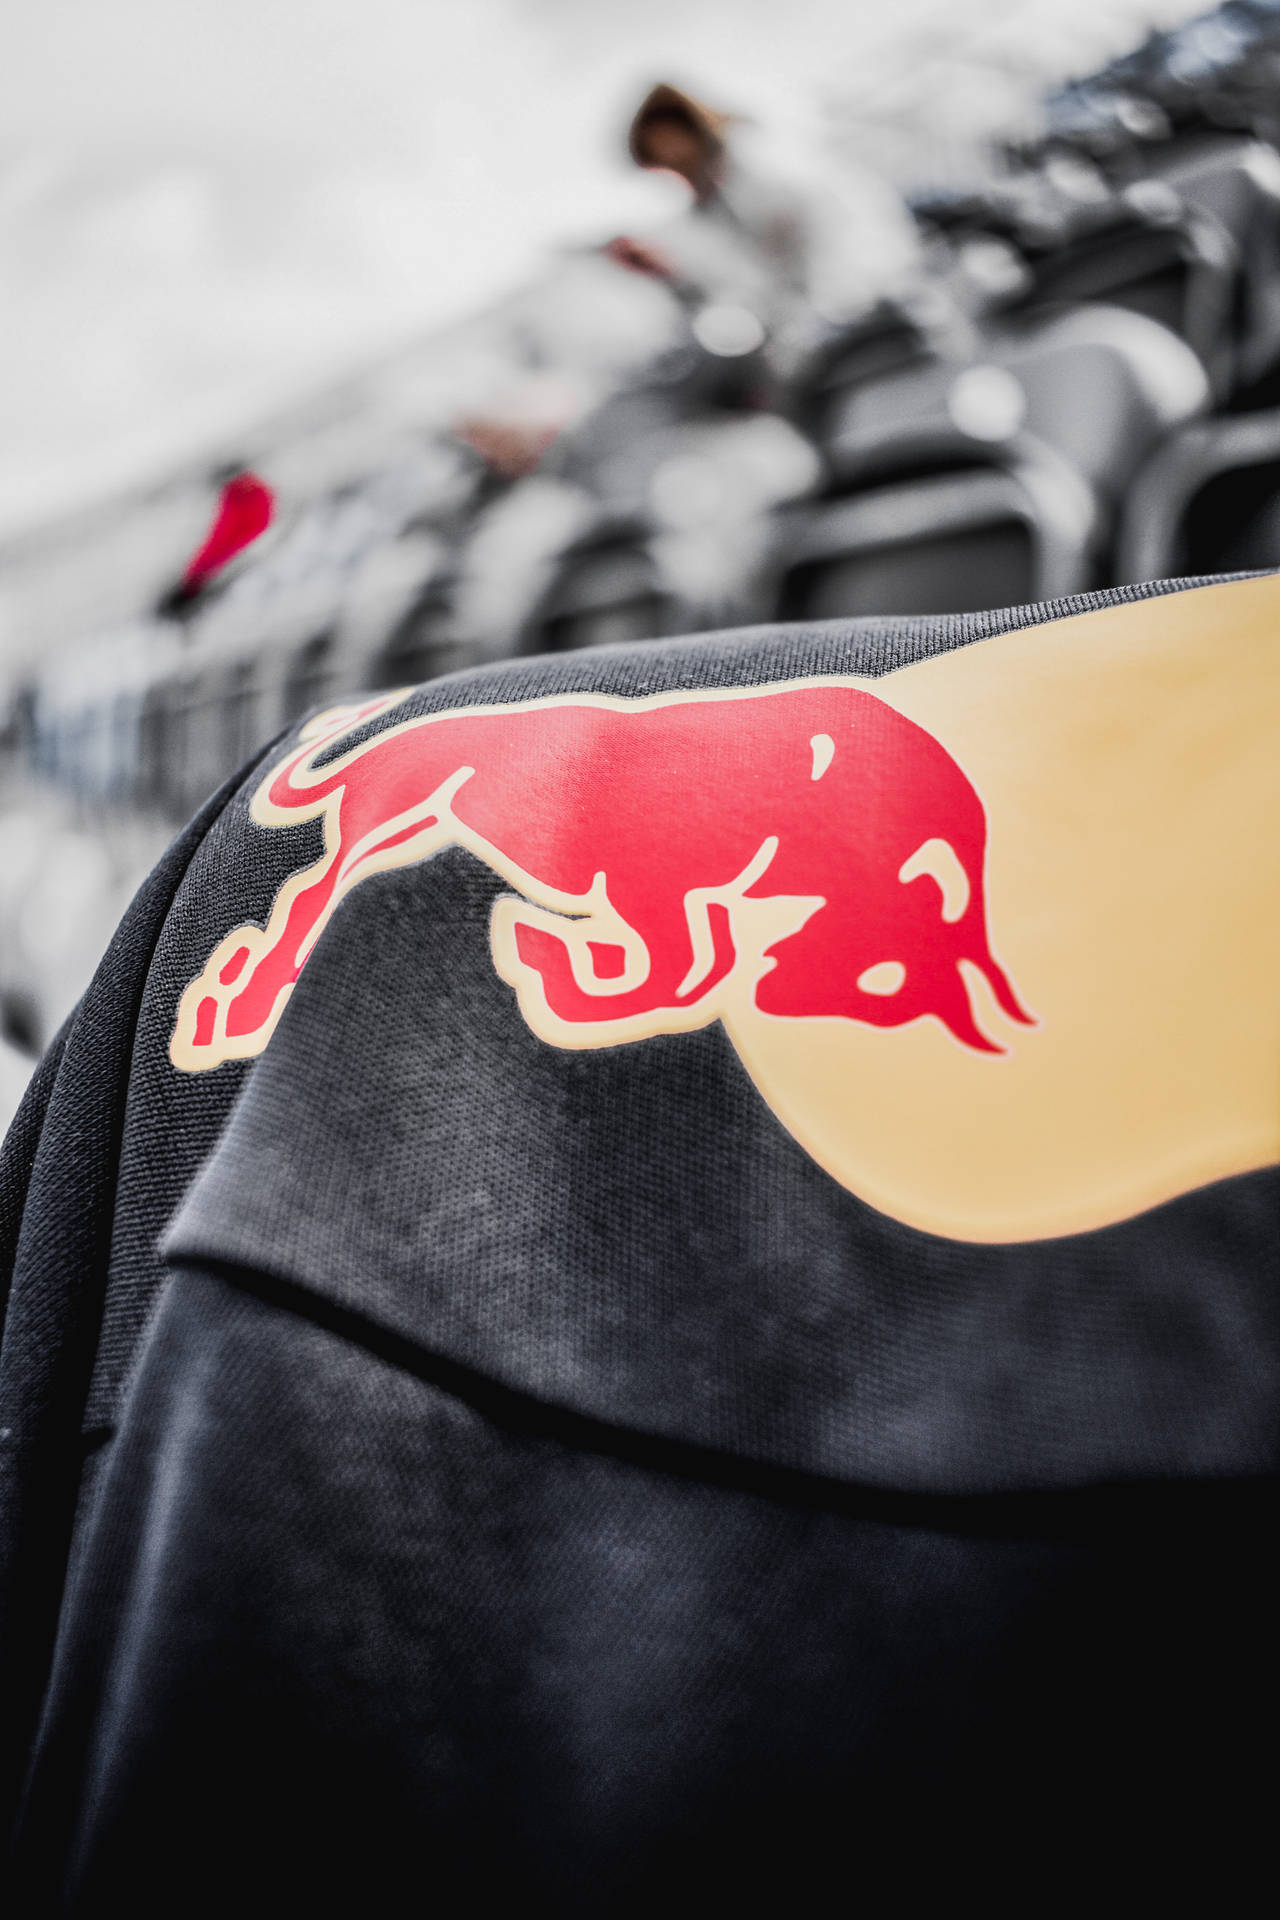 Action Unleashed: Red Bull Extreme Sports Wallpaper